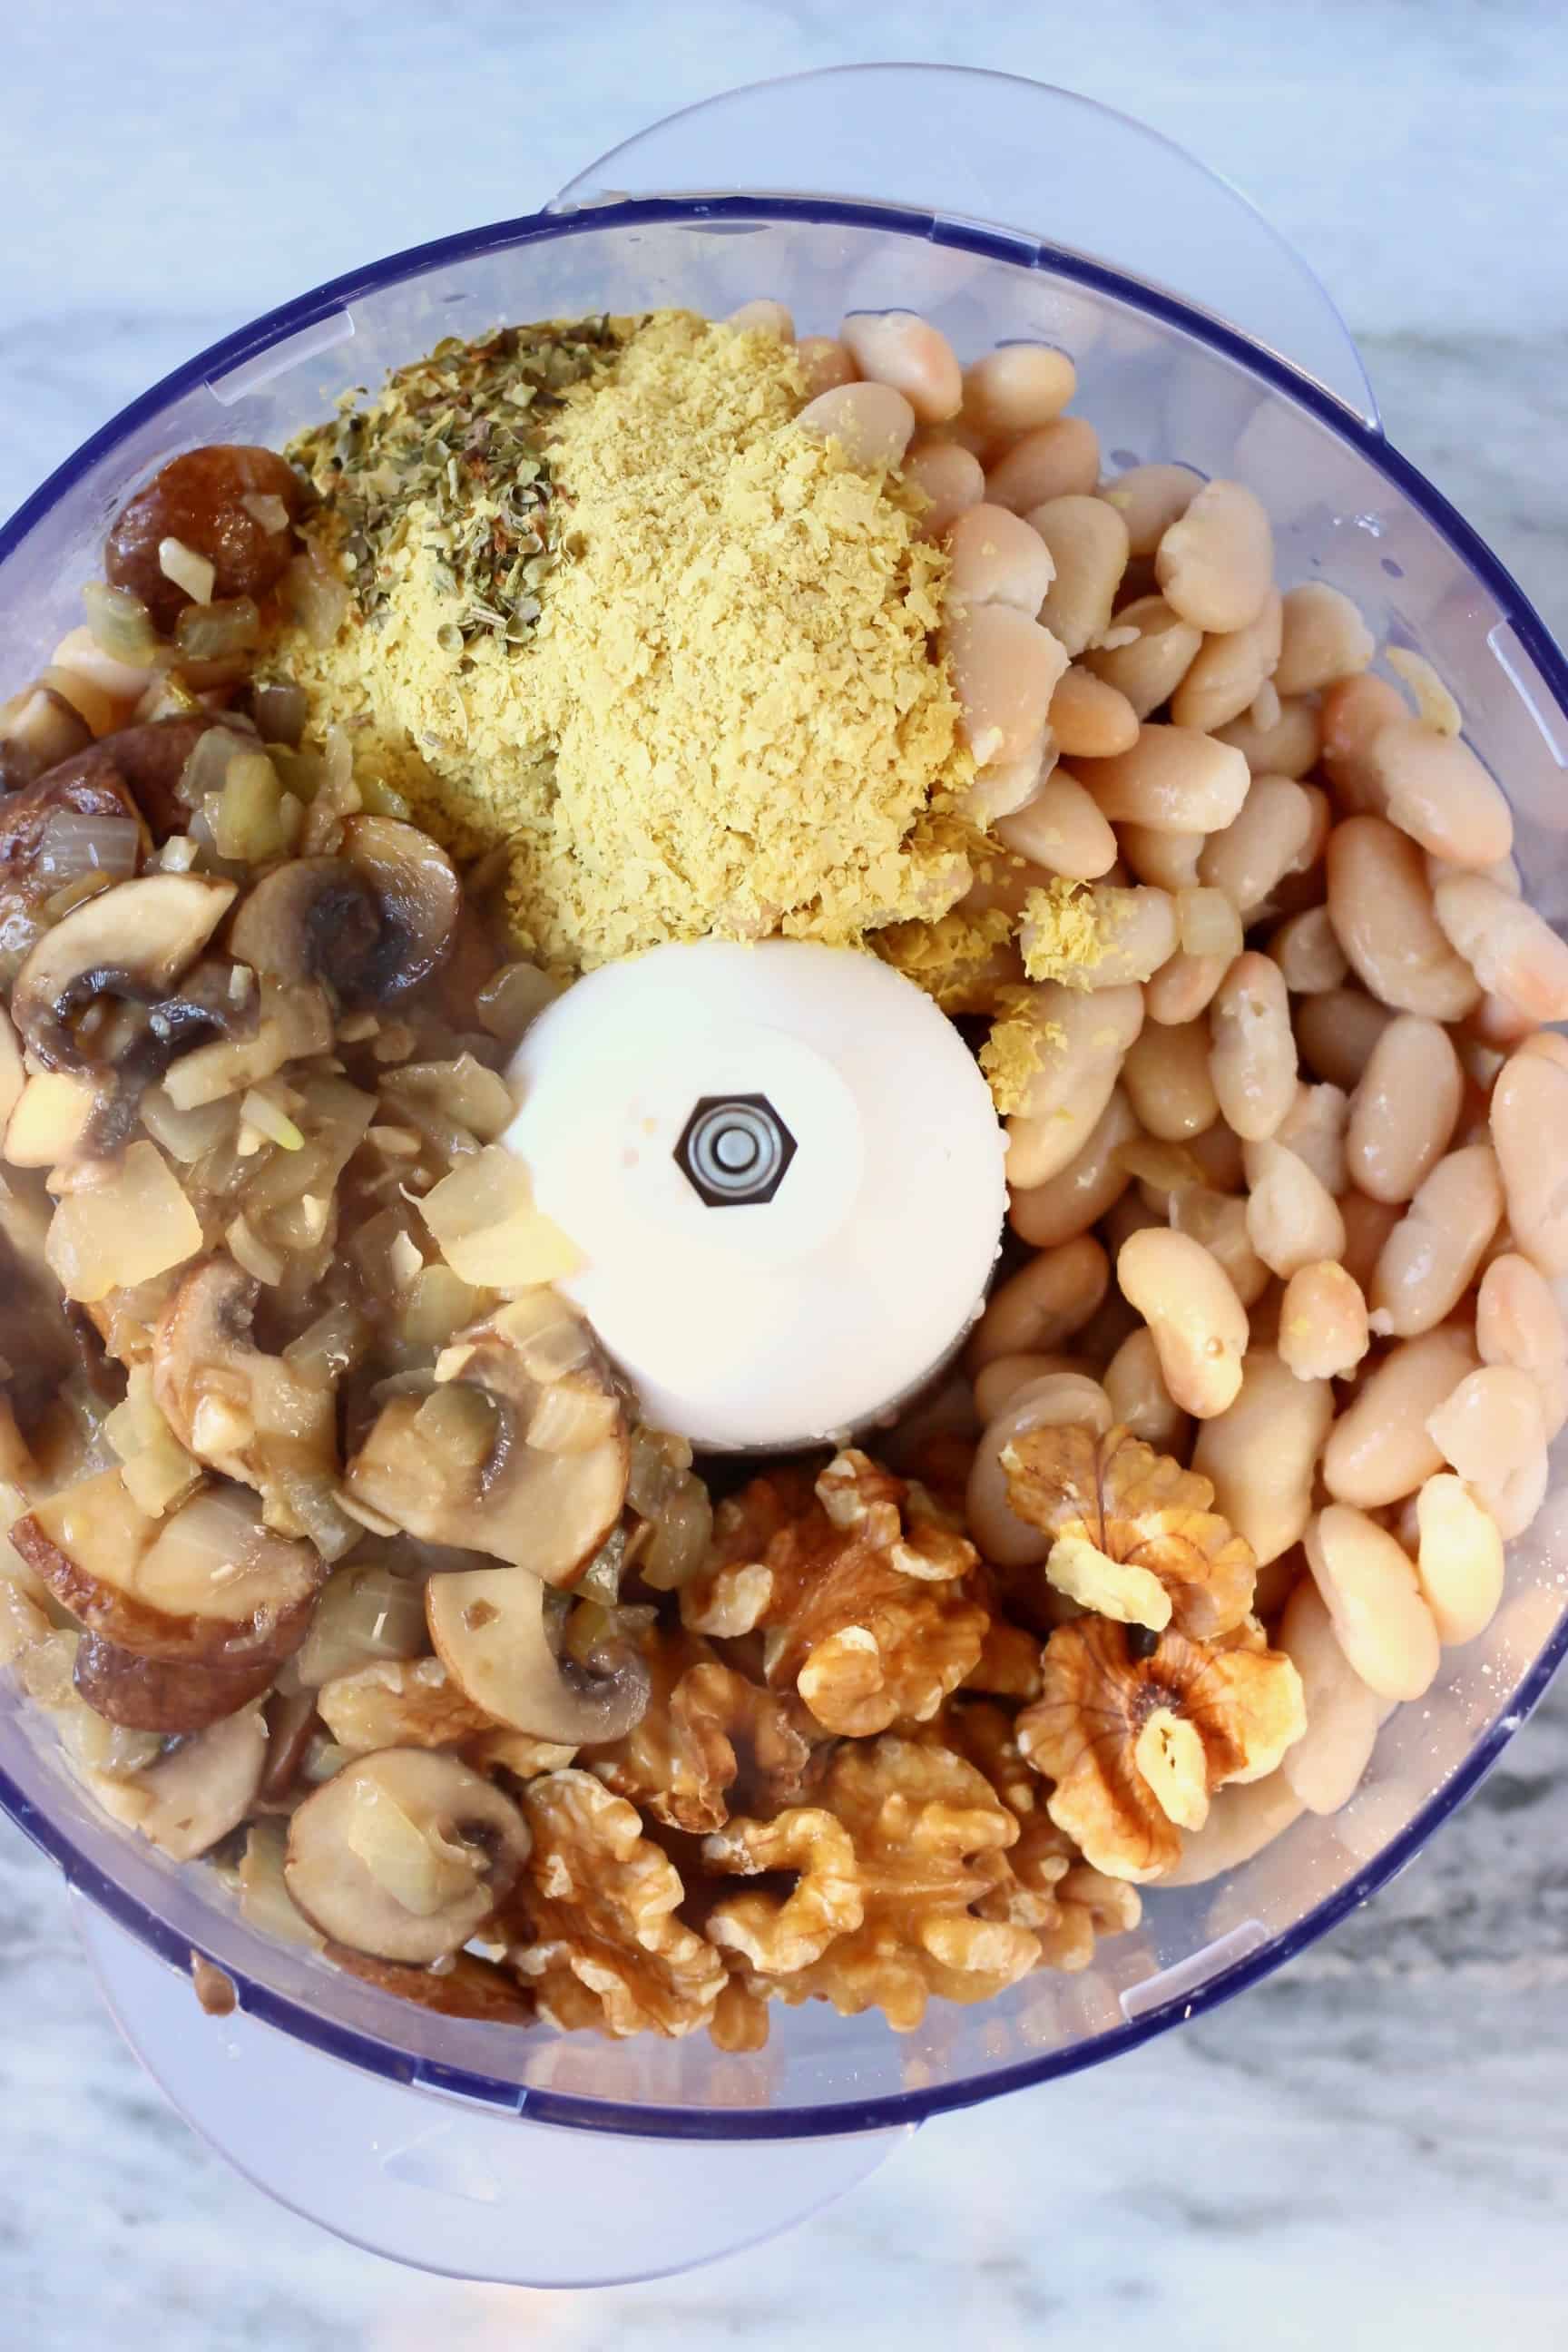 Fried sliced mushrooms, diced onion, white beans, walnuts, yellow nutritional yeast and dried green herbs in a food processor